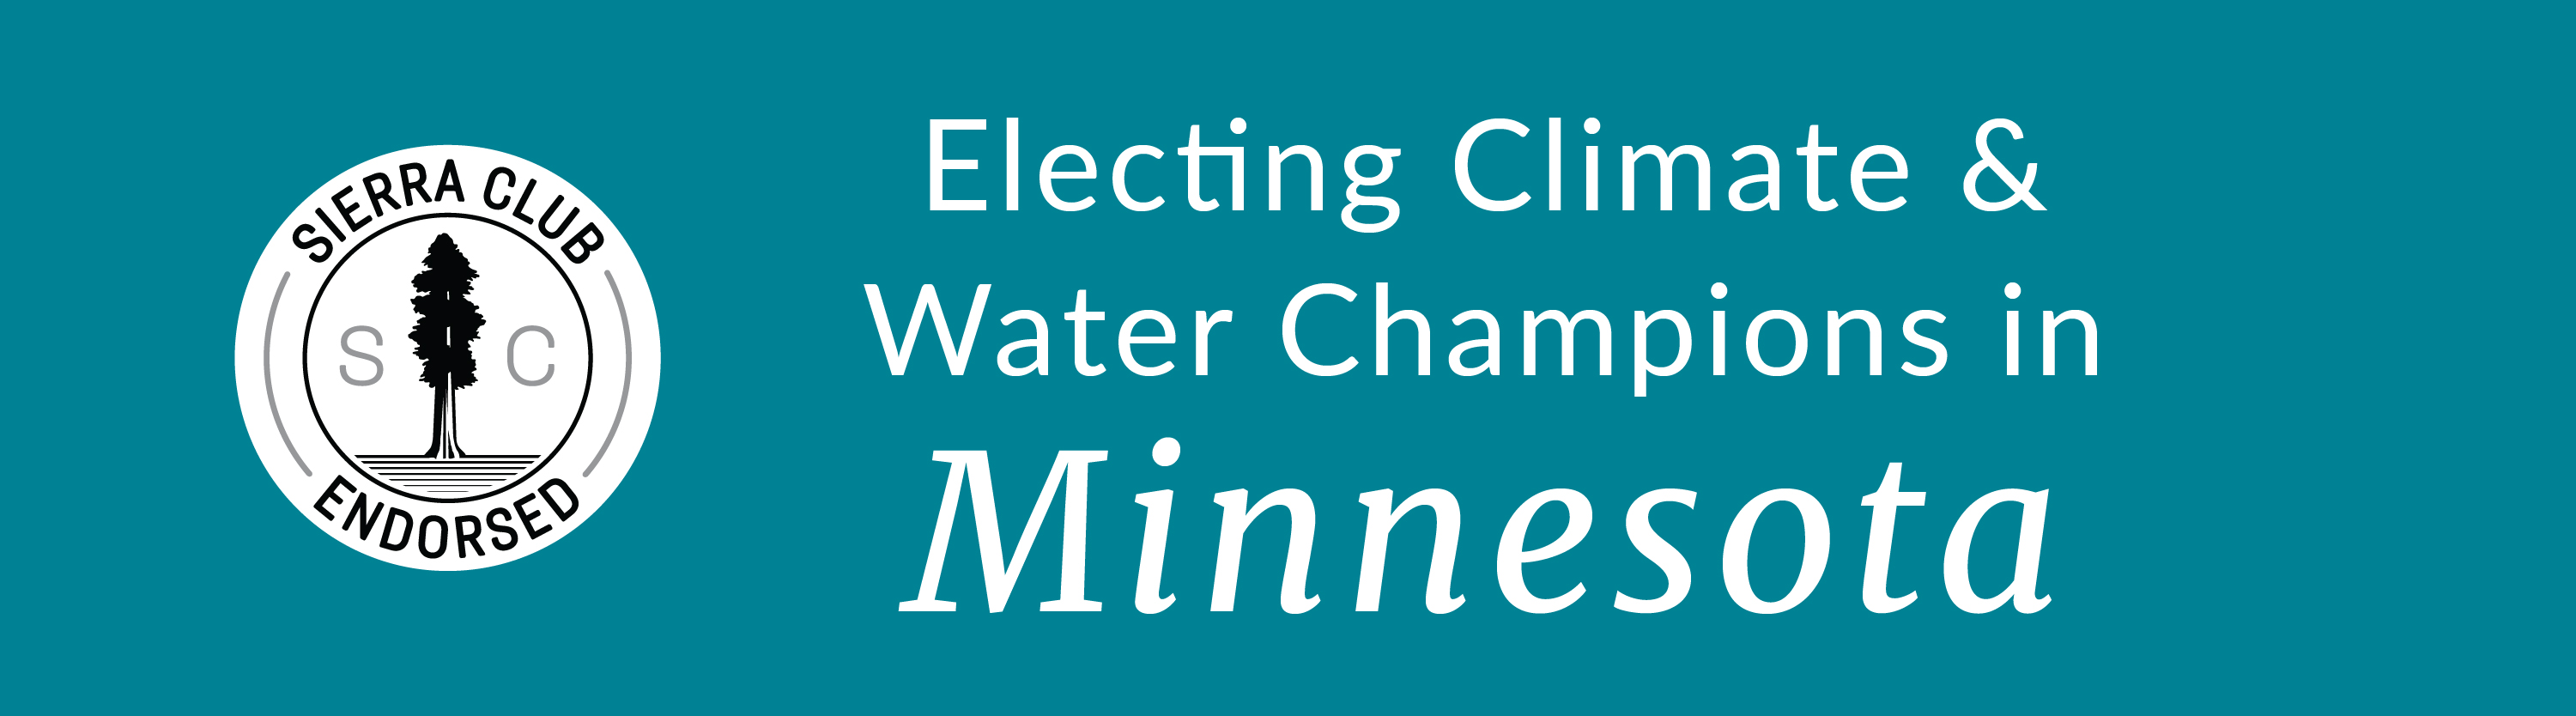 banner: Electing Climate & Water Champions in Minnesota